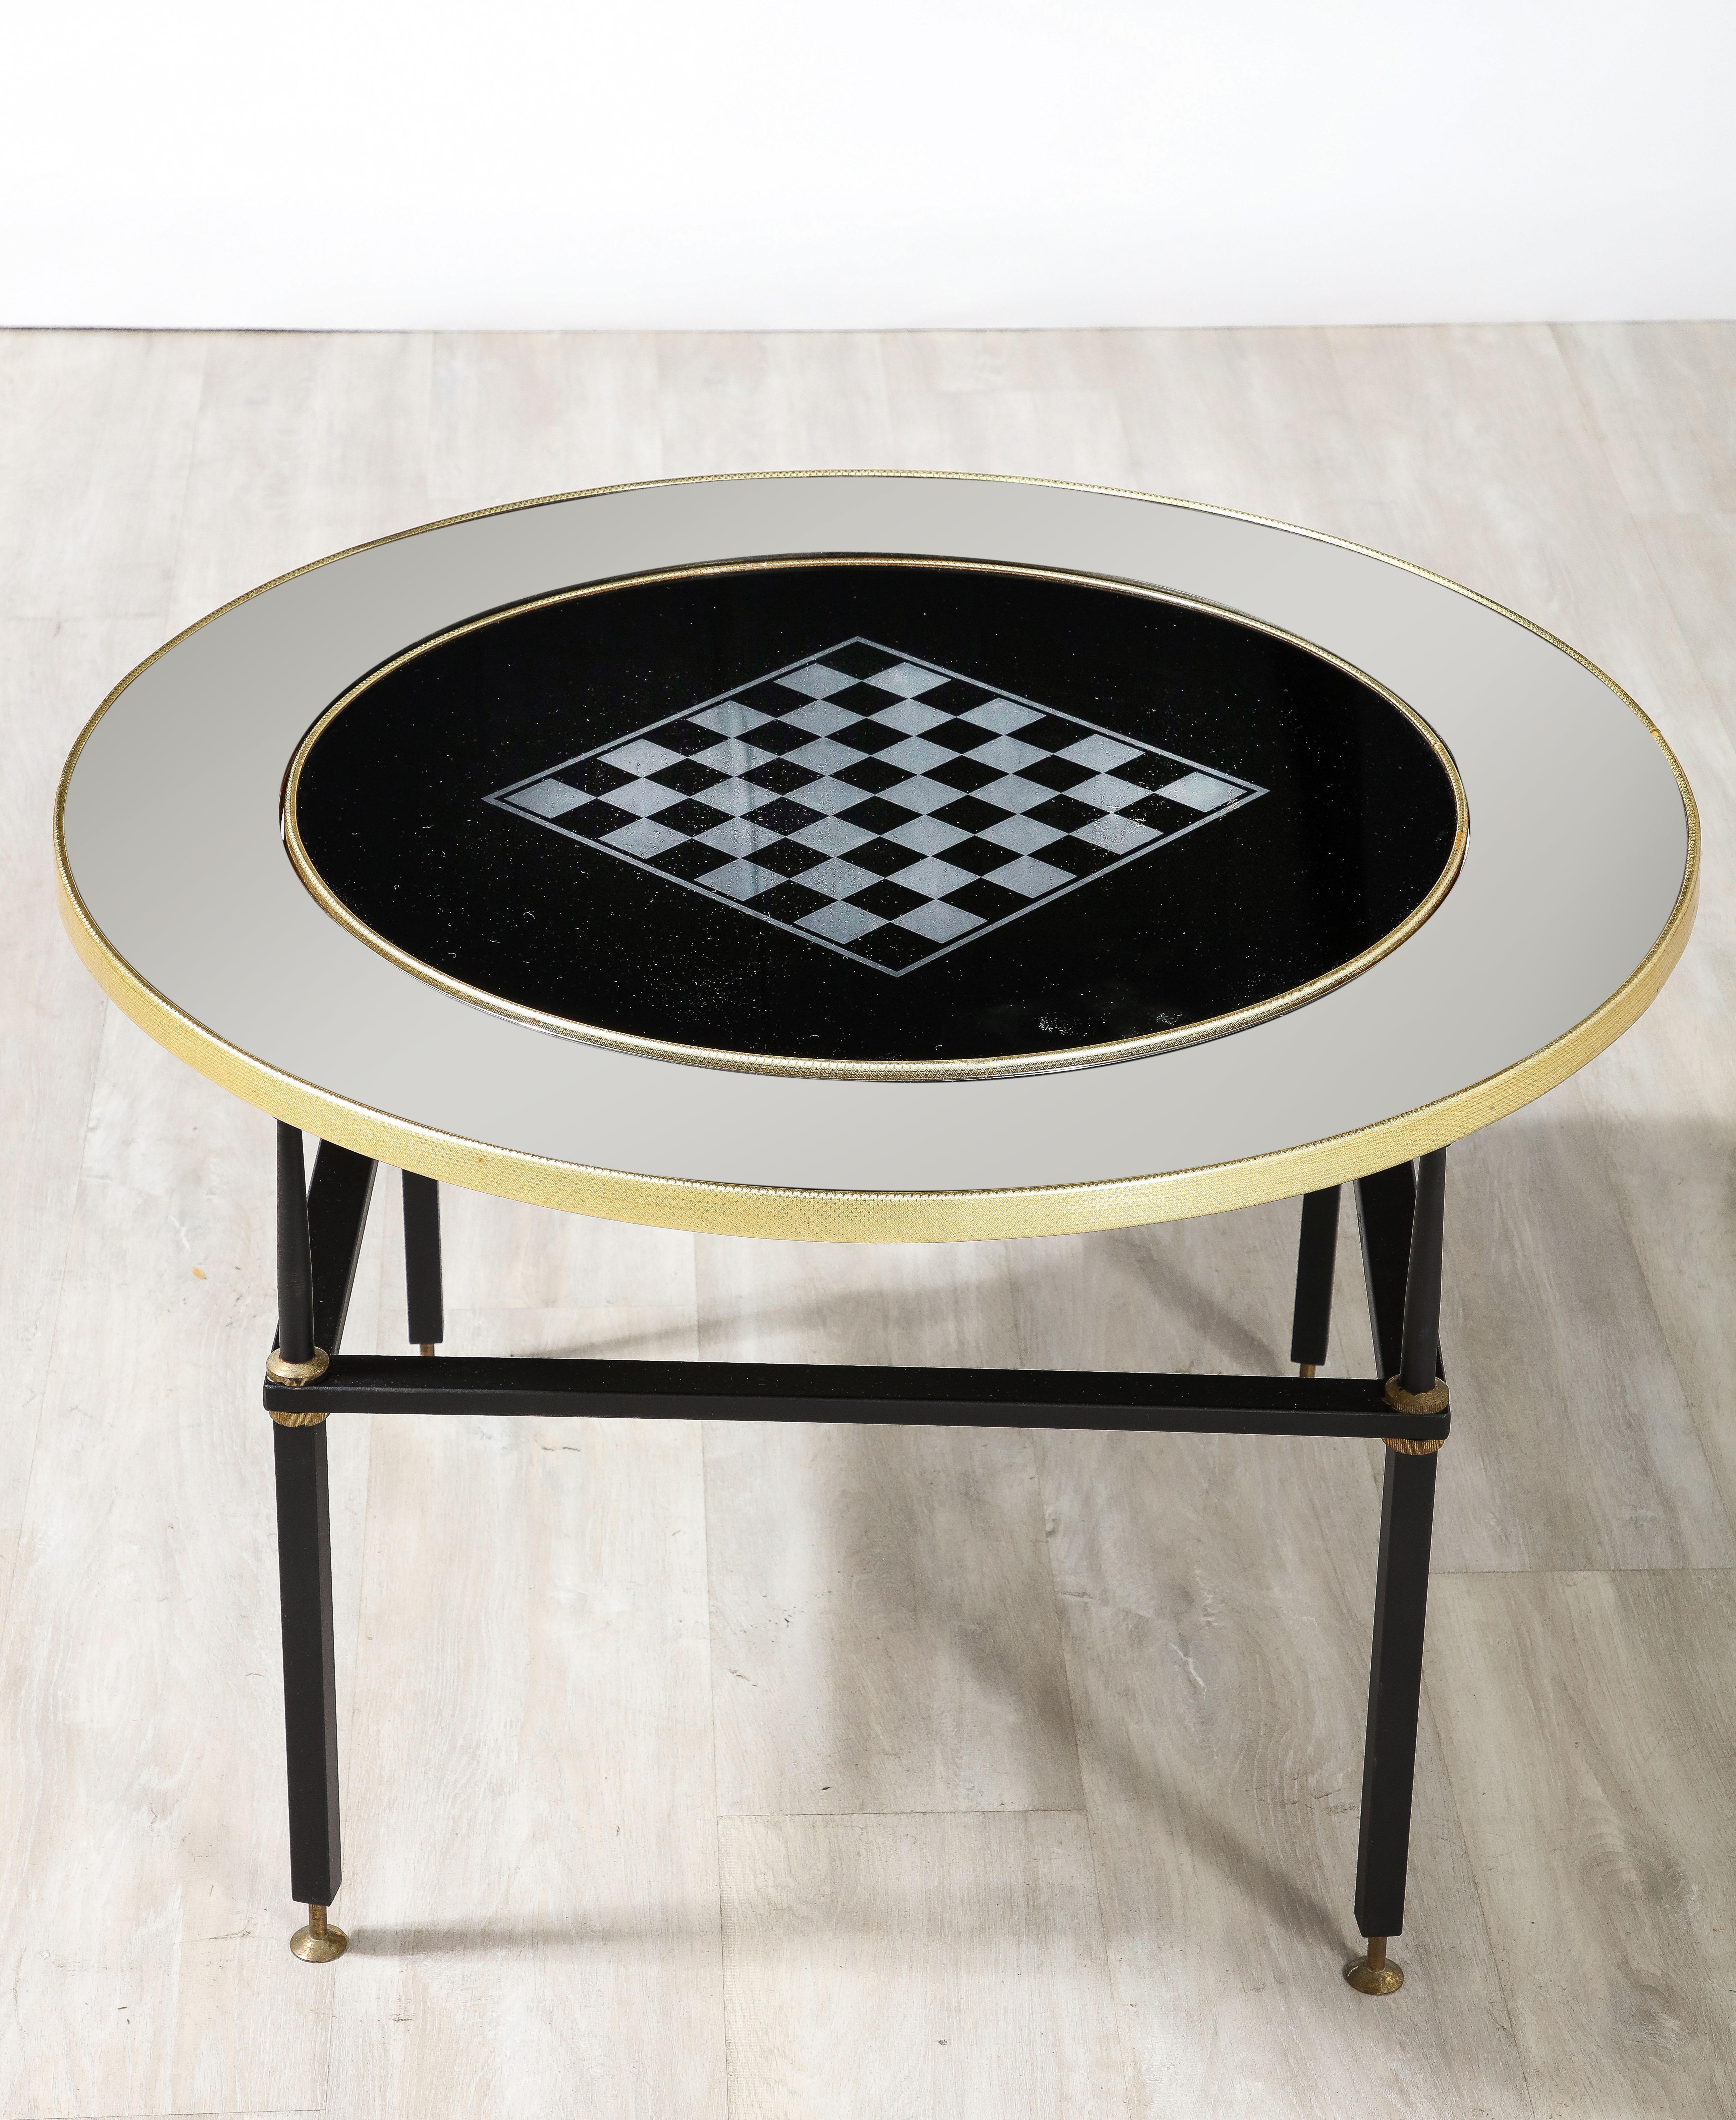 Metal Cristal Arte Glass Table with Chess Board and Musical Motif, circa 1955 For Sale